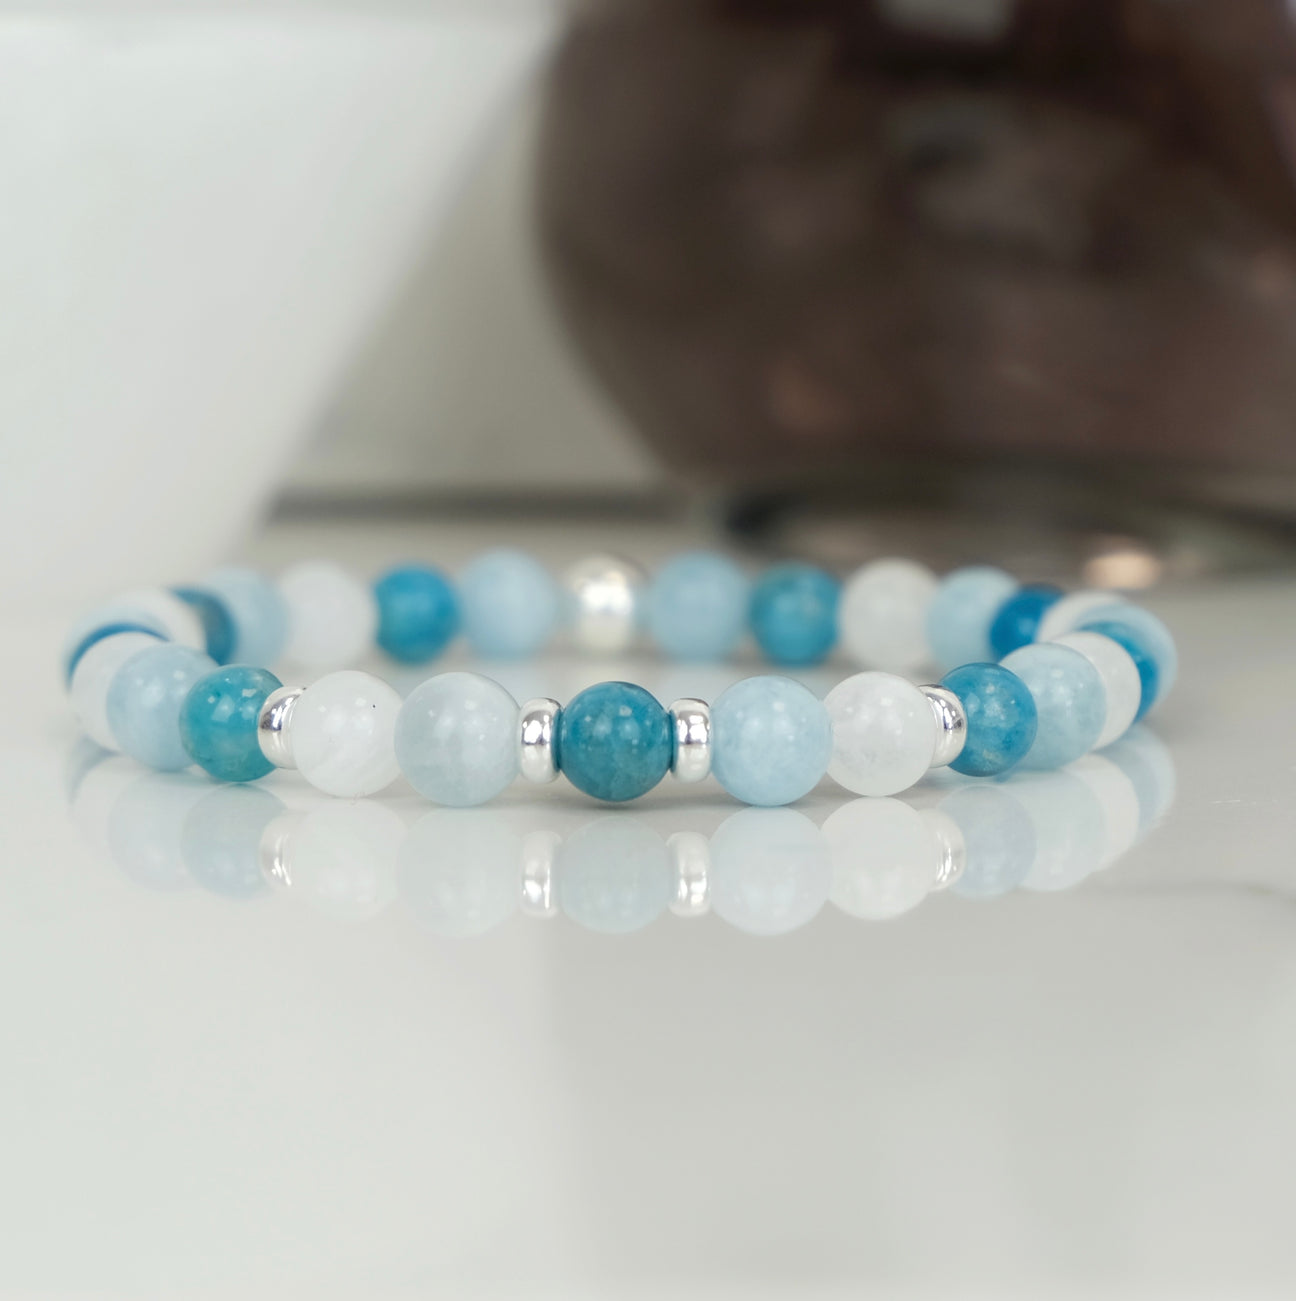 An Apatite, Moonstone and Aquamarine gemstone bracelet with 925 sterling silver accessories